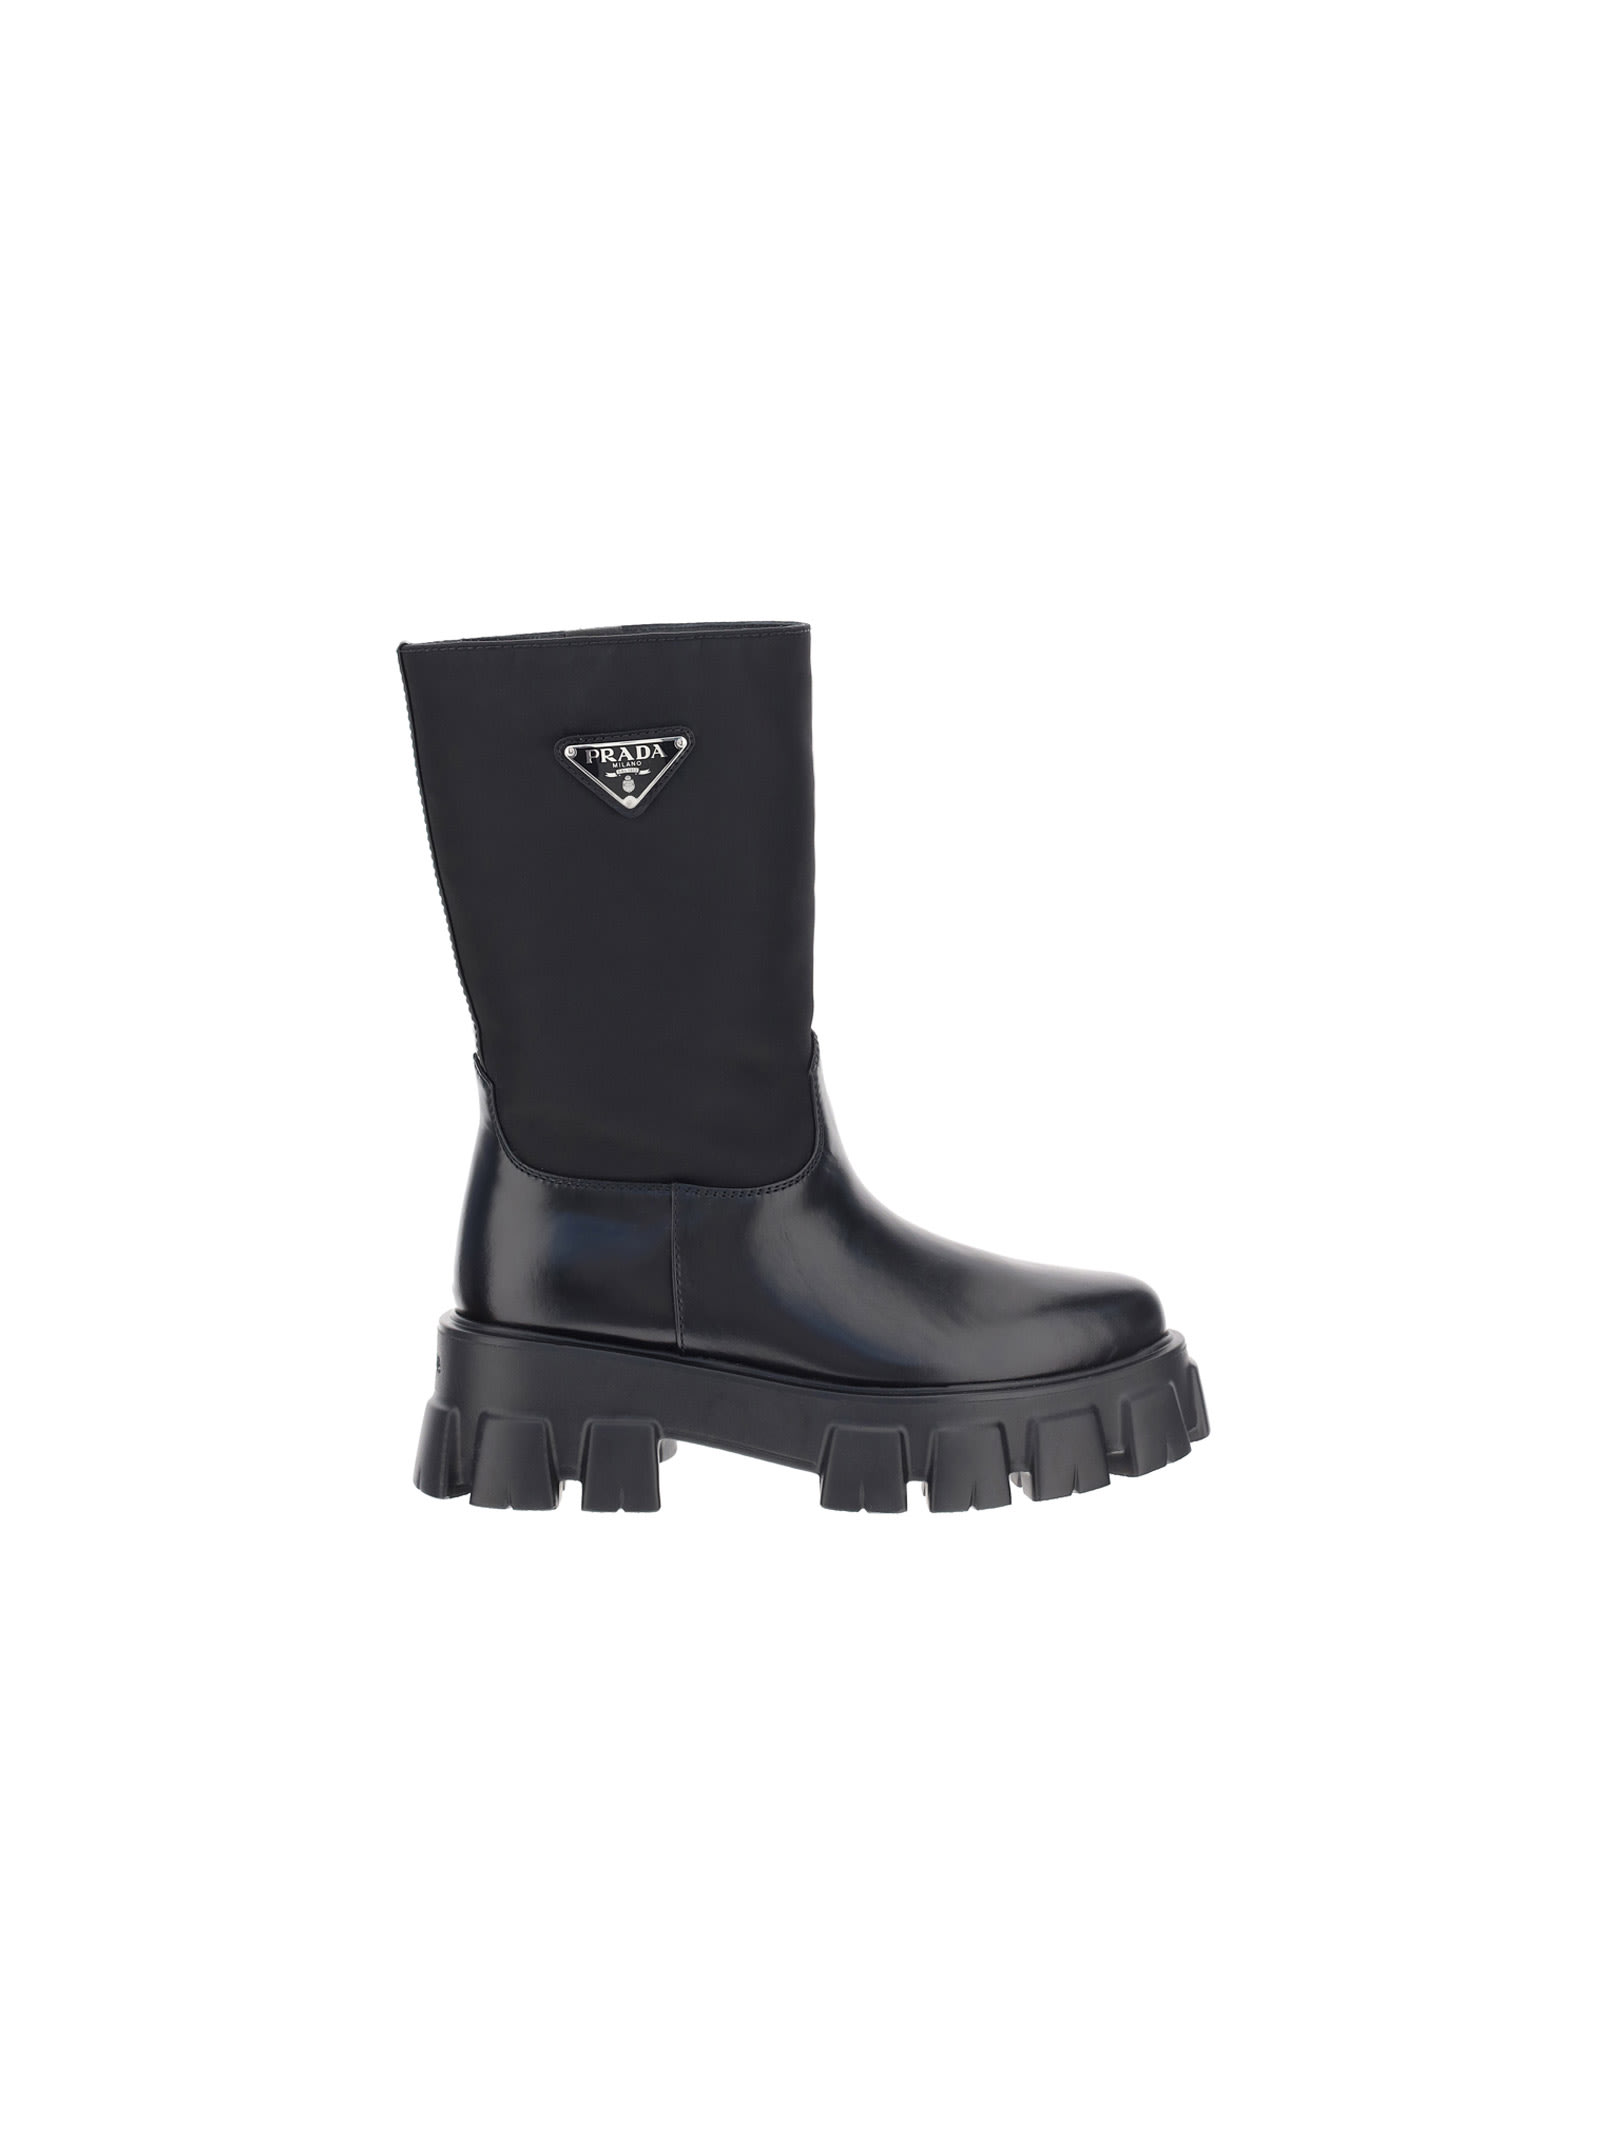 Buy Prada Monolith Sharp Boots online, shop Prada shoes with free shipping